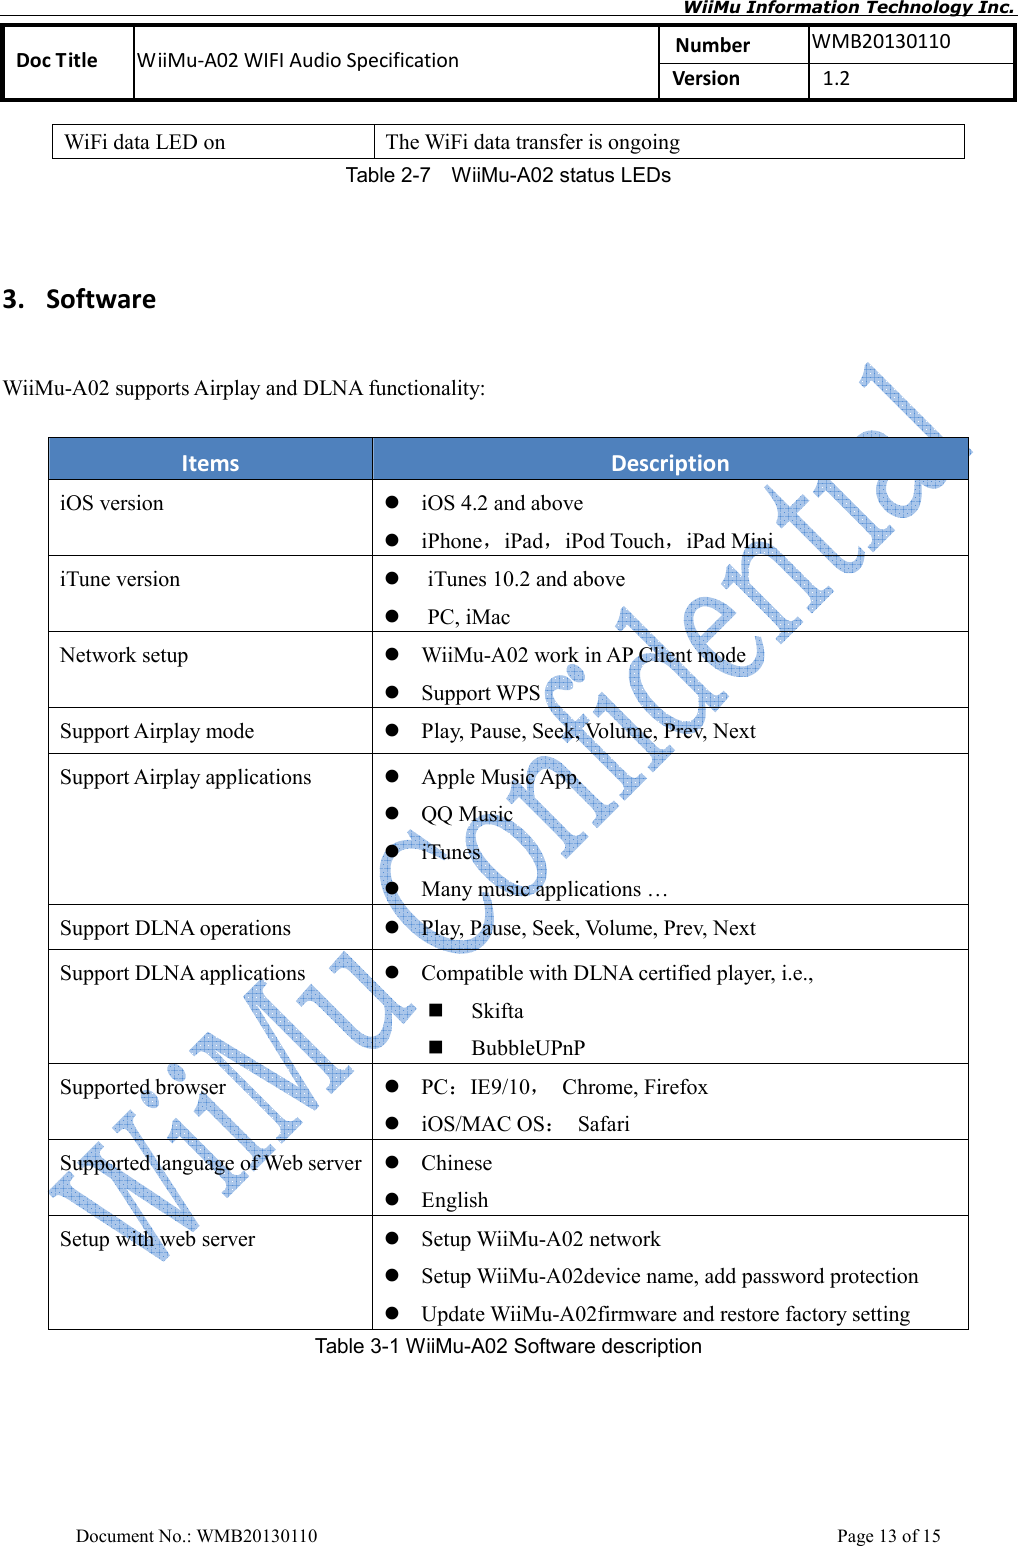       WiiMu Information Technology Inc. Number  WMB20130110 Doc Title  WiiMu-A02 WIFI Audio Specification  Version    1.2  Document No.: WMB20130110    Page 13 of 15 WiFi data LED on  The WiFi data transfer is ongoing Table 2-7    WiiMu-A02 status LEDs    3. Software   WiiMu-A02 supports Airplay and DLNA functionality:  Items  Description iOS version   iOS 4.2 and above  iPhoneiPadiPod TouchiPad Mini   iTune version     iTunes 10.2 and above    PC, iMac Network setup   WiiMu-A02 work in AP Client mode  Support WPS Support Airplay mode     Play, Pause, Seek, Volume, Prev, Next   Support Airplay applications   Apple Music App.  QQ Music  iTunes  Many music applications … Support DLNA operations   Play, Pause, Seek, Volume, Prev, Next Support DLNA applications   Compatible with DLNA certified player, i.e.,  Skifta  BubbleUPnP Supported browser   PCIE9/10  Chrome, Firefox  iOS/MAC OS  Safari Supported language of Web server  Chinese  English Setup with web server   Setup WiiMu-A02 network  Setup WiiMu-A02device name, add password protection  Update WiiMu-A02firmware and restore factory setting Table 3-1 WiiMu-A02 Software description 